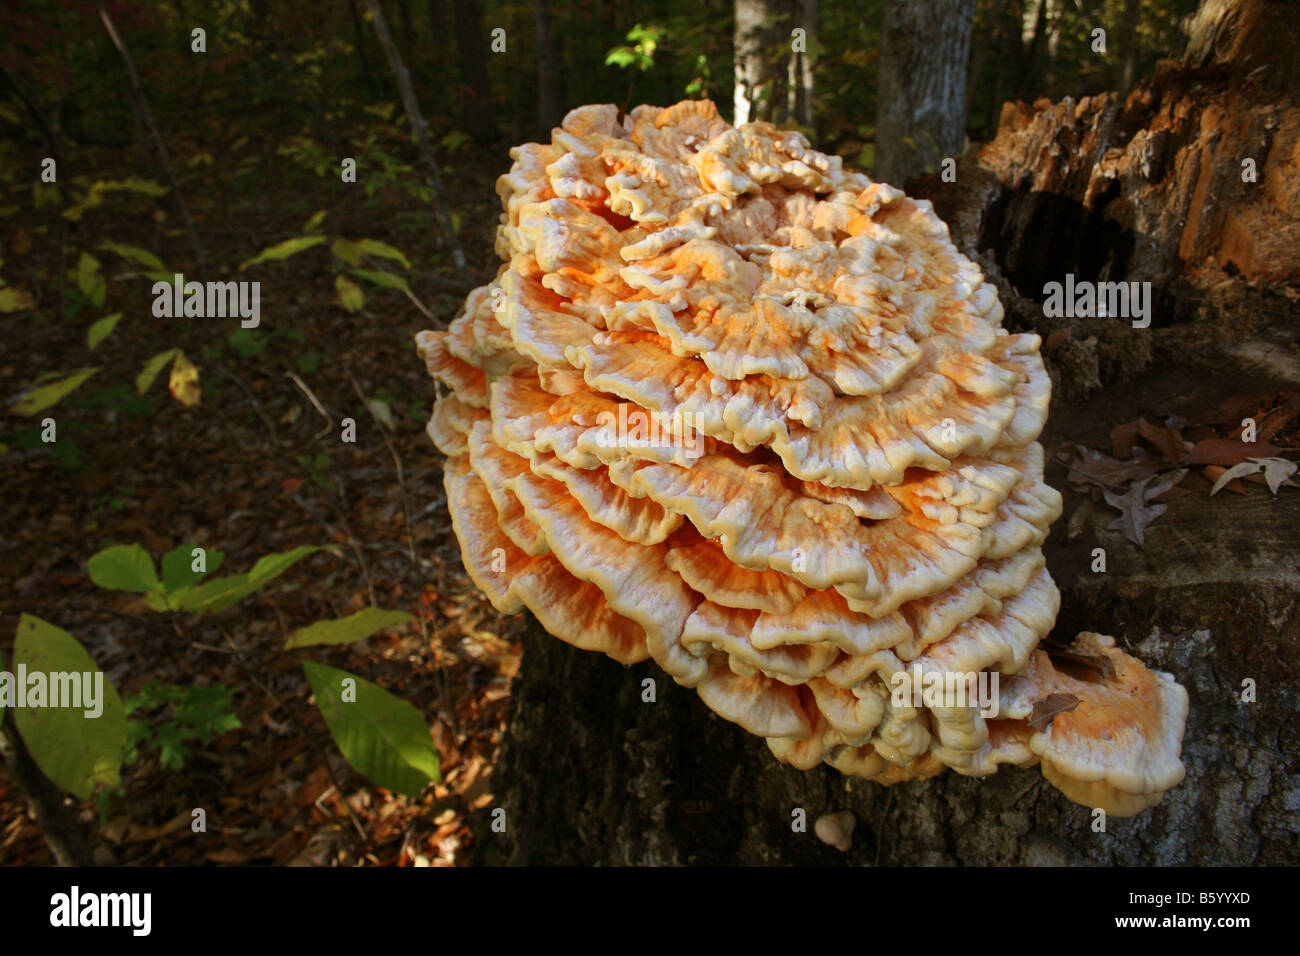 Laetiporus sulphureus, an edible mushroom, growing on decaying tree stump. Also known as the 'Chicken of the Woods'. Stock Photo